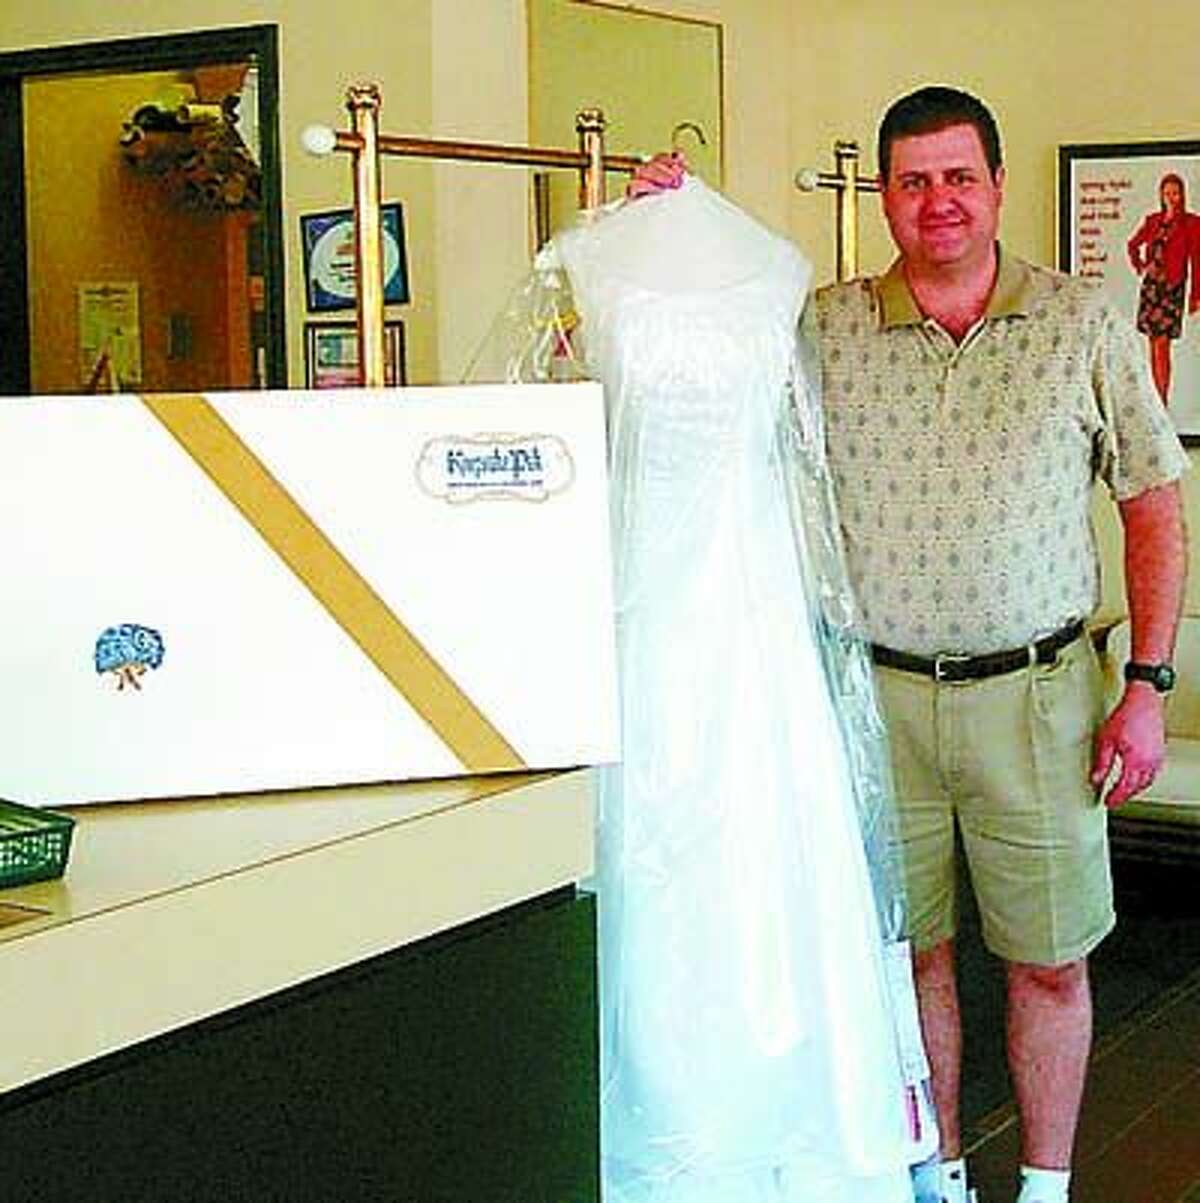 Preserve your memories by letting Fashion Cleaners heirloom your wedding gown.